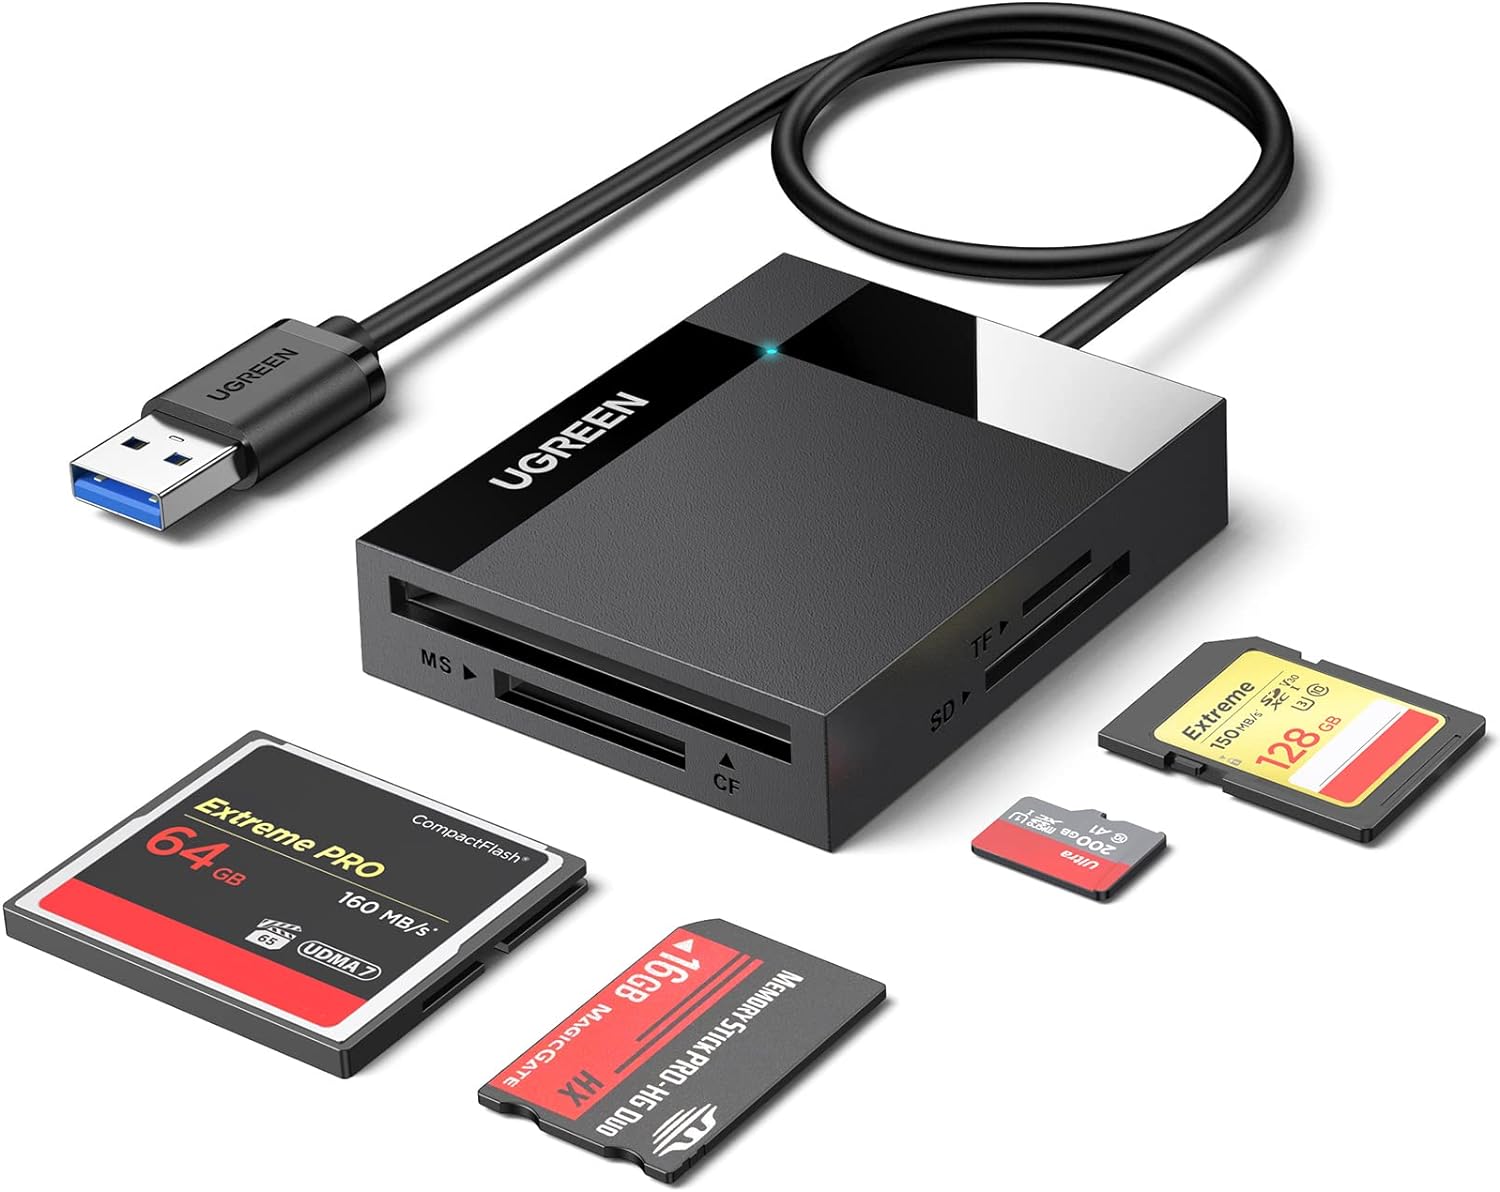 Check all external devices and storage connected to the computer
Disconnect any unnecessary devices such as external hard drives, USB drives, or SD cards